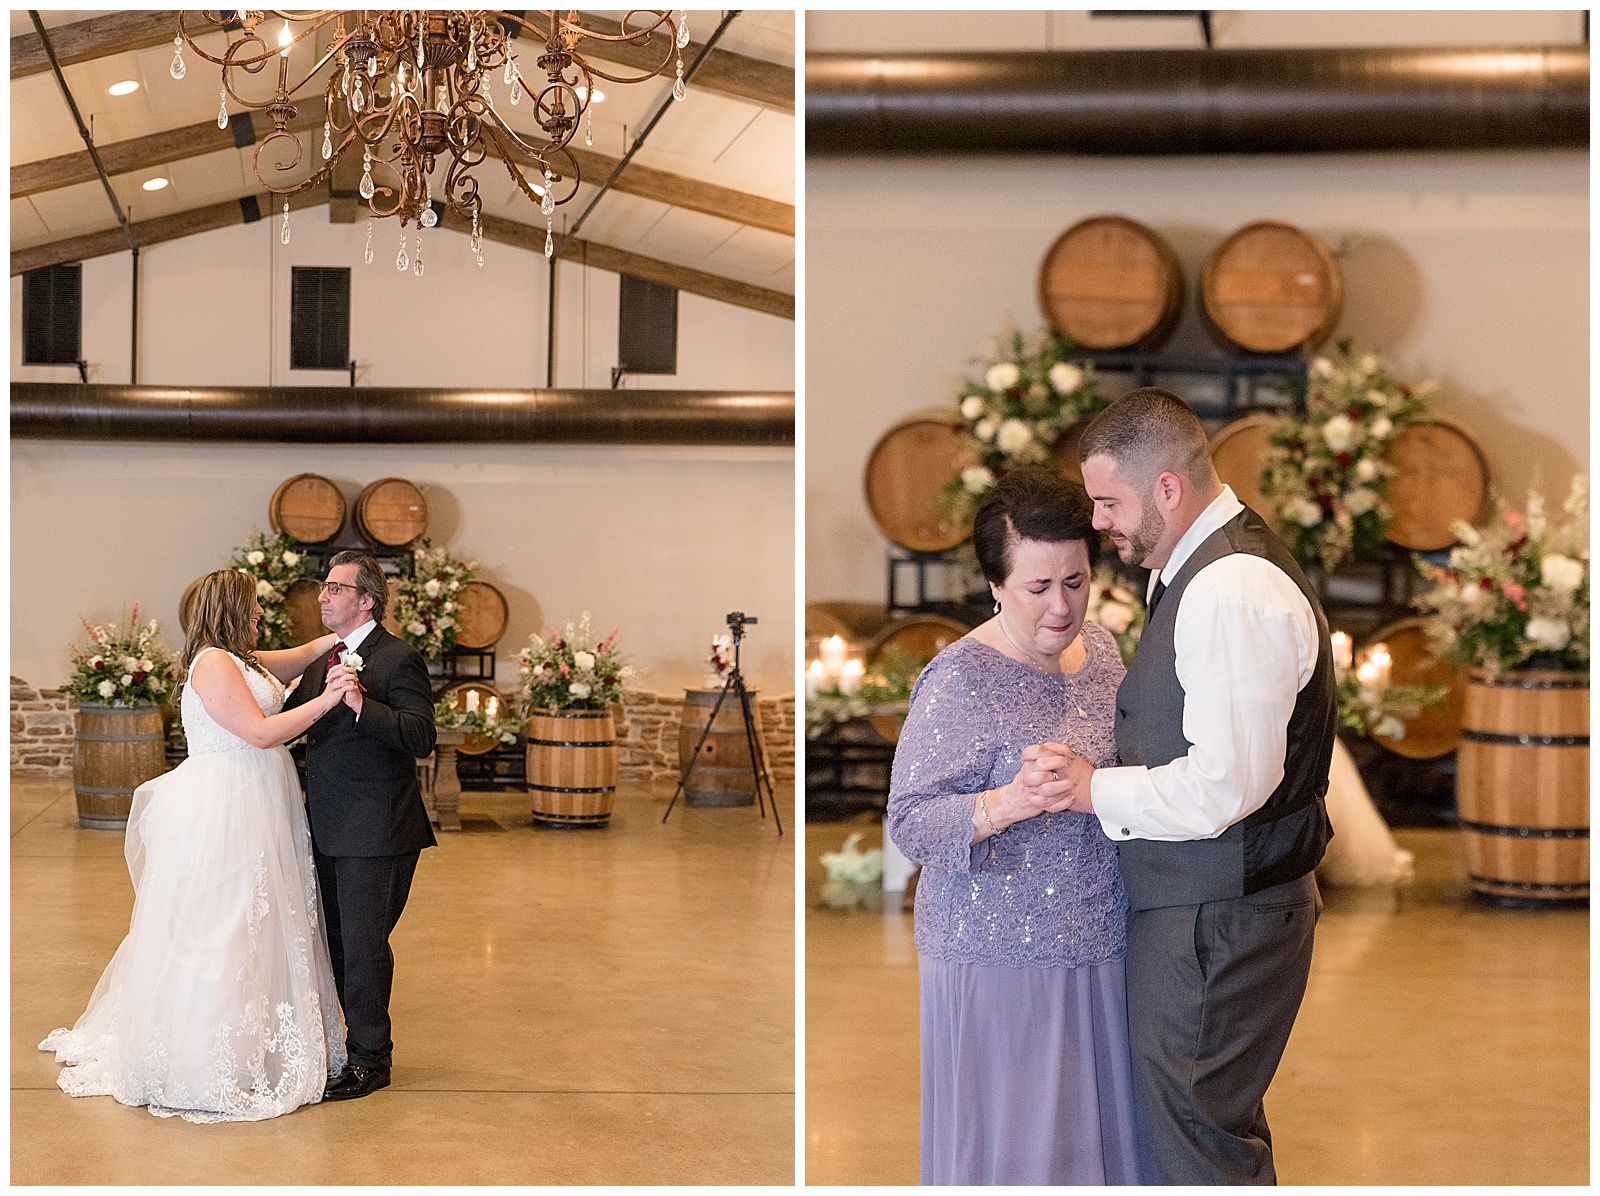 bride dancing with her father and groom dancing with his mother during indoor fall wedding reception